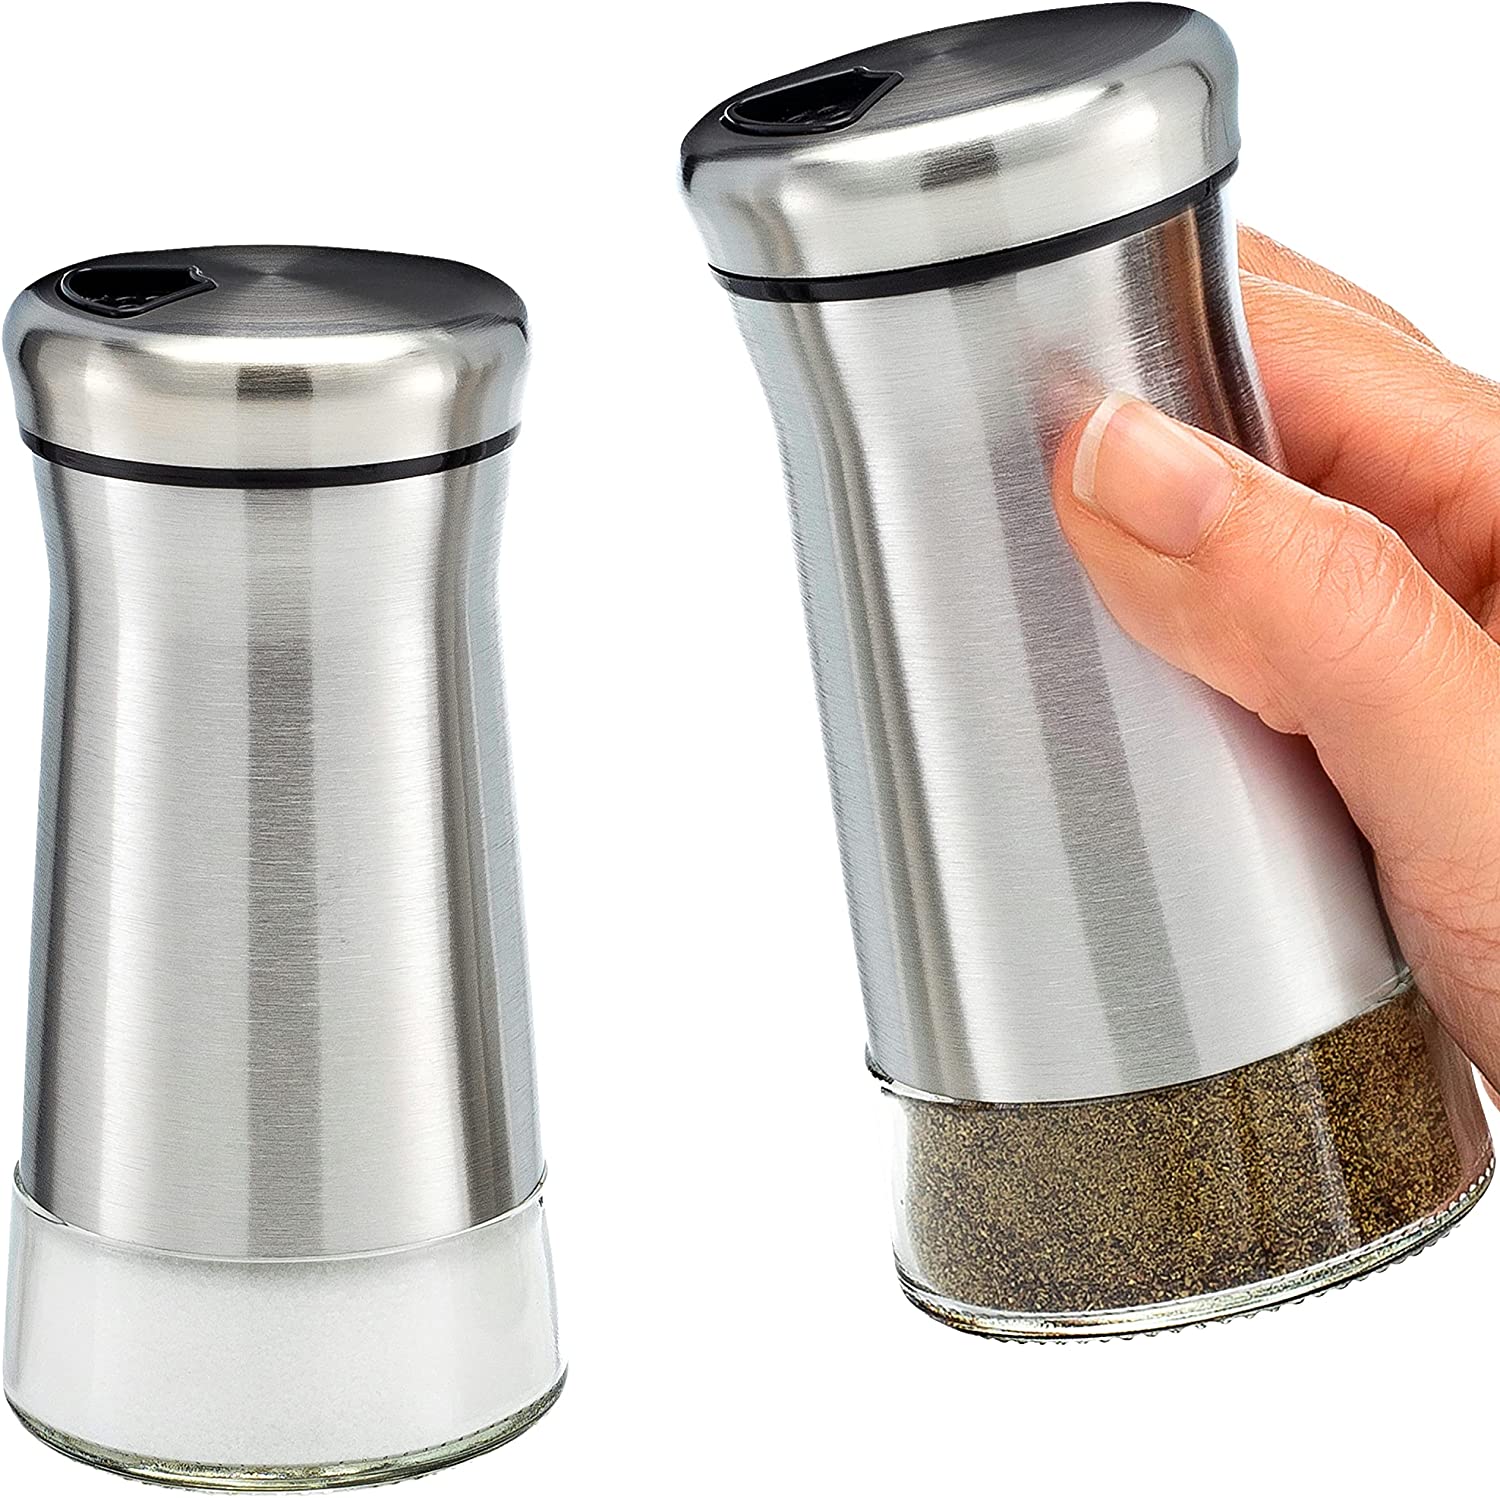 You Have to See This Quirky Collection of Salt and Pepper Shakers